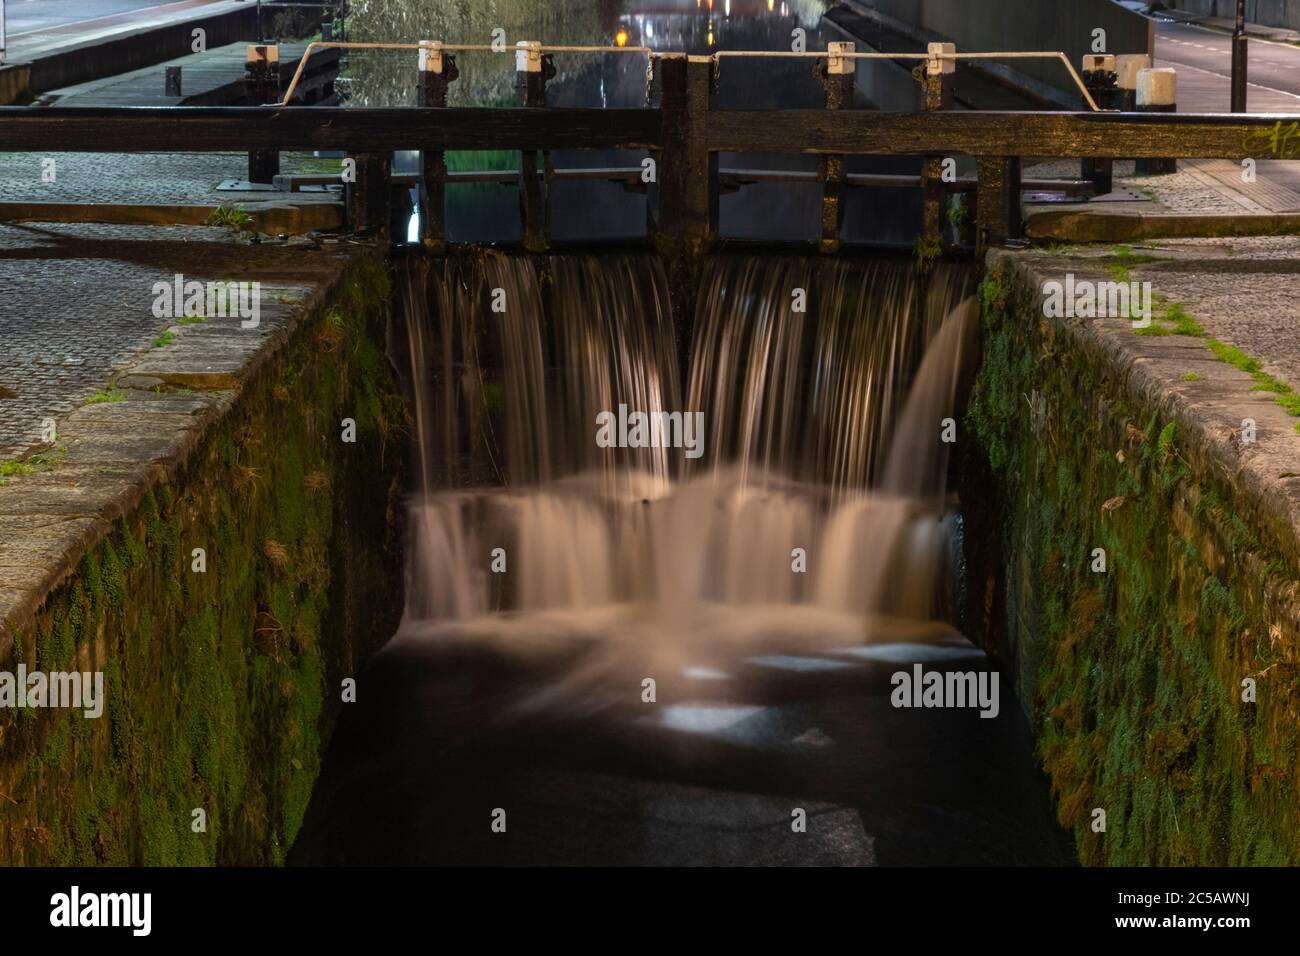 slow shutter speed canal lock at night Stock Photo